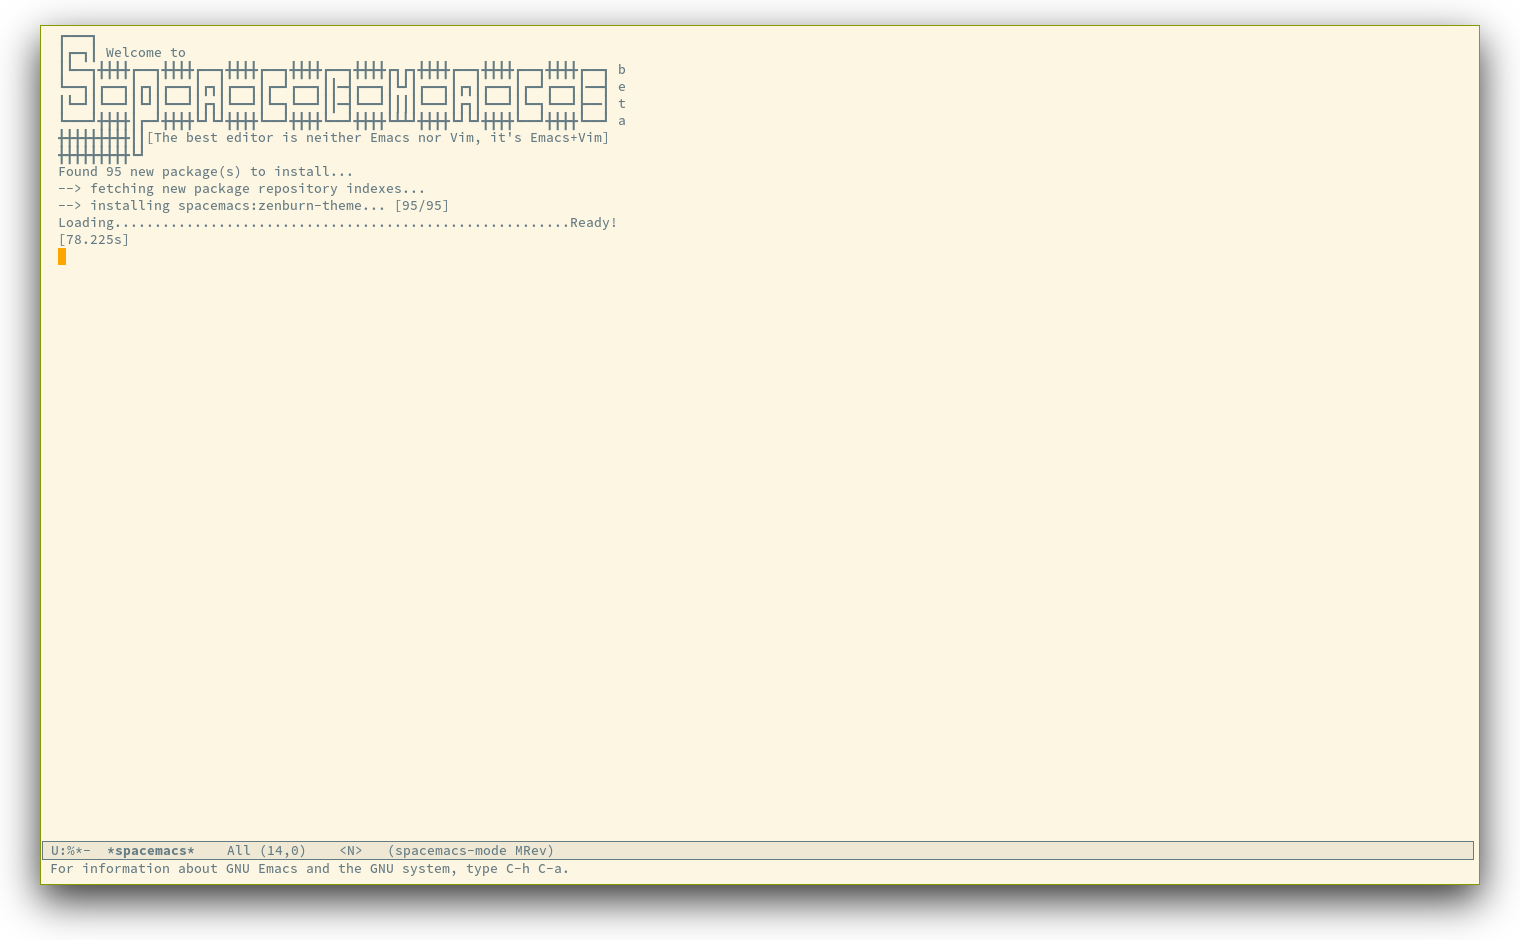 /TakeV/spacemacs/media/commit/1070d4b56a0c839a6ab4bc07fca325481e404f86/doc/img/spacemacs-startup.png